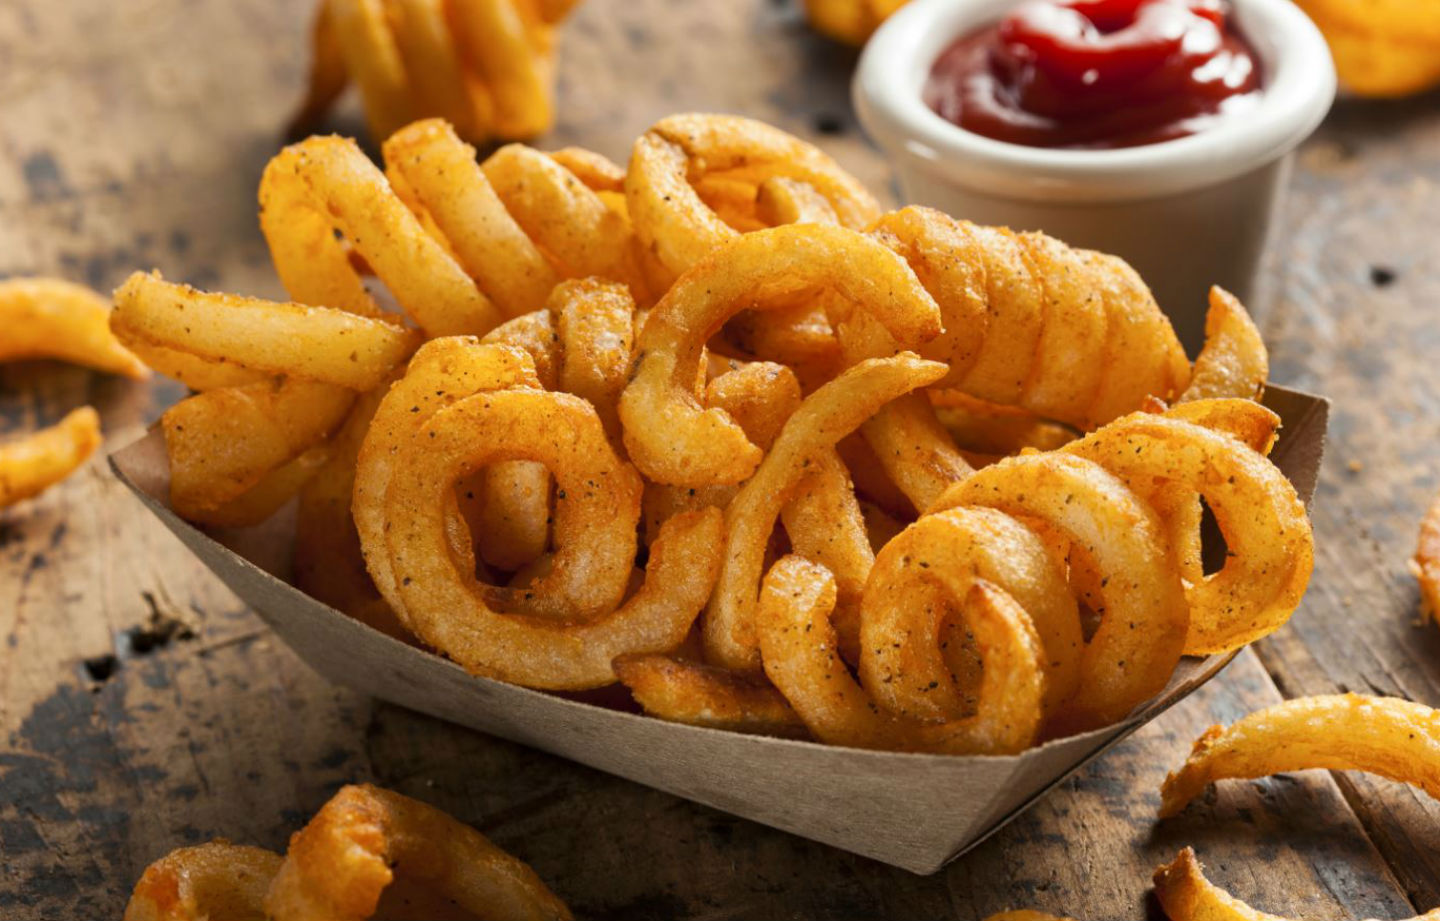 Why The Heck Do All Curly Fries Taste Exactly the Same?